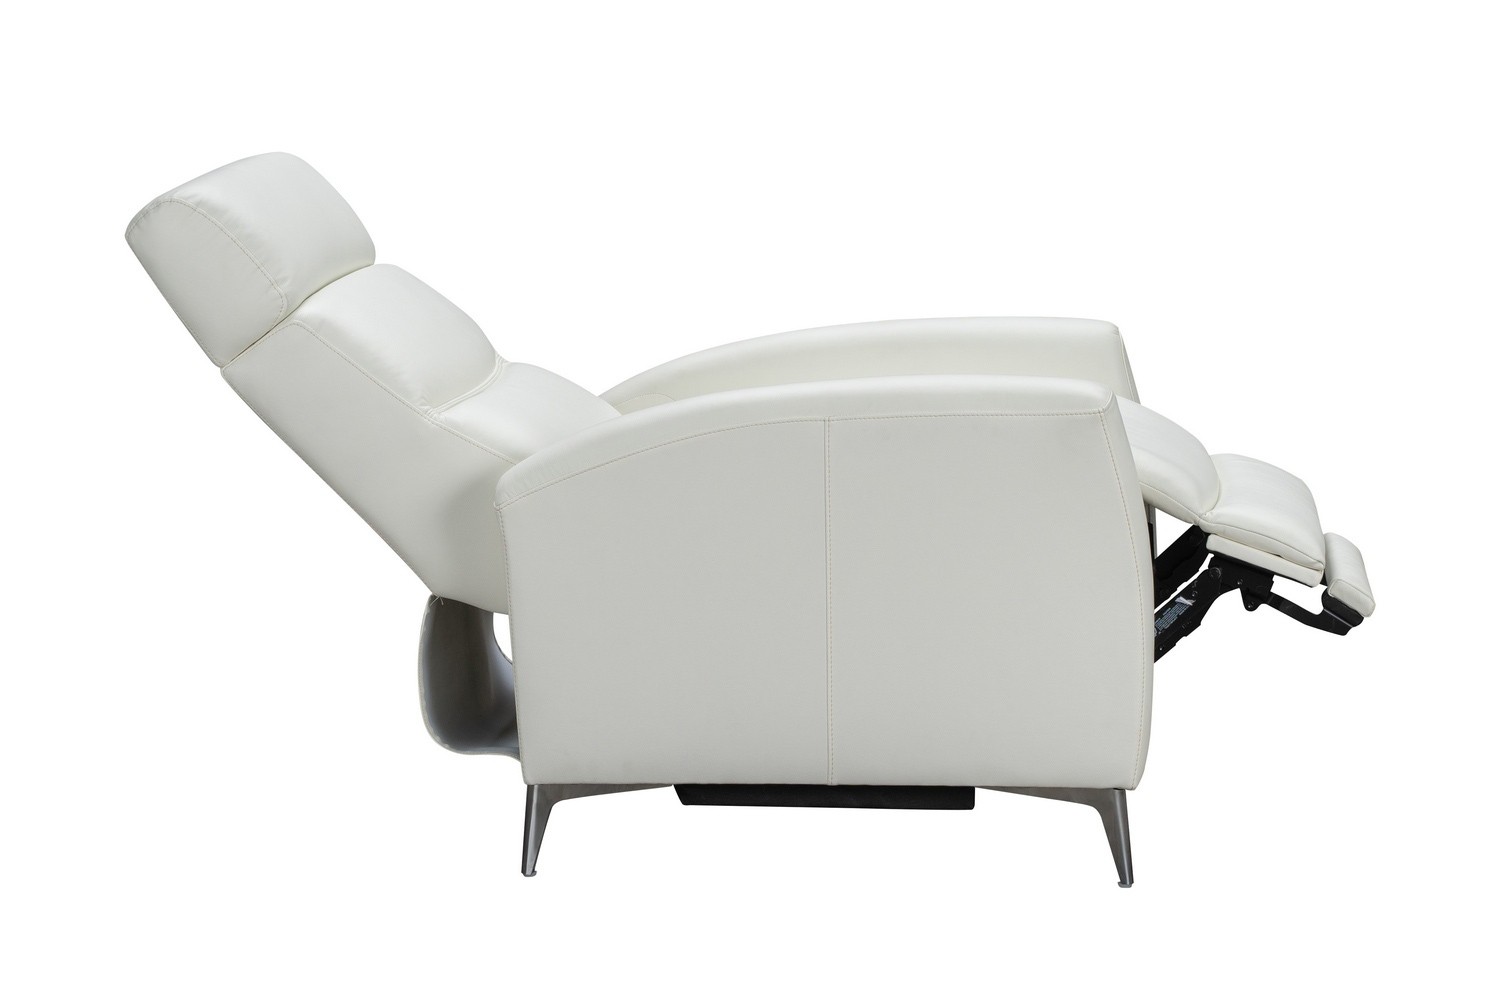 Barcalounger Zane Recliner Chair - Enzo Winter White/Leather Match